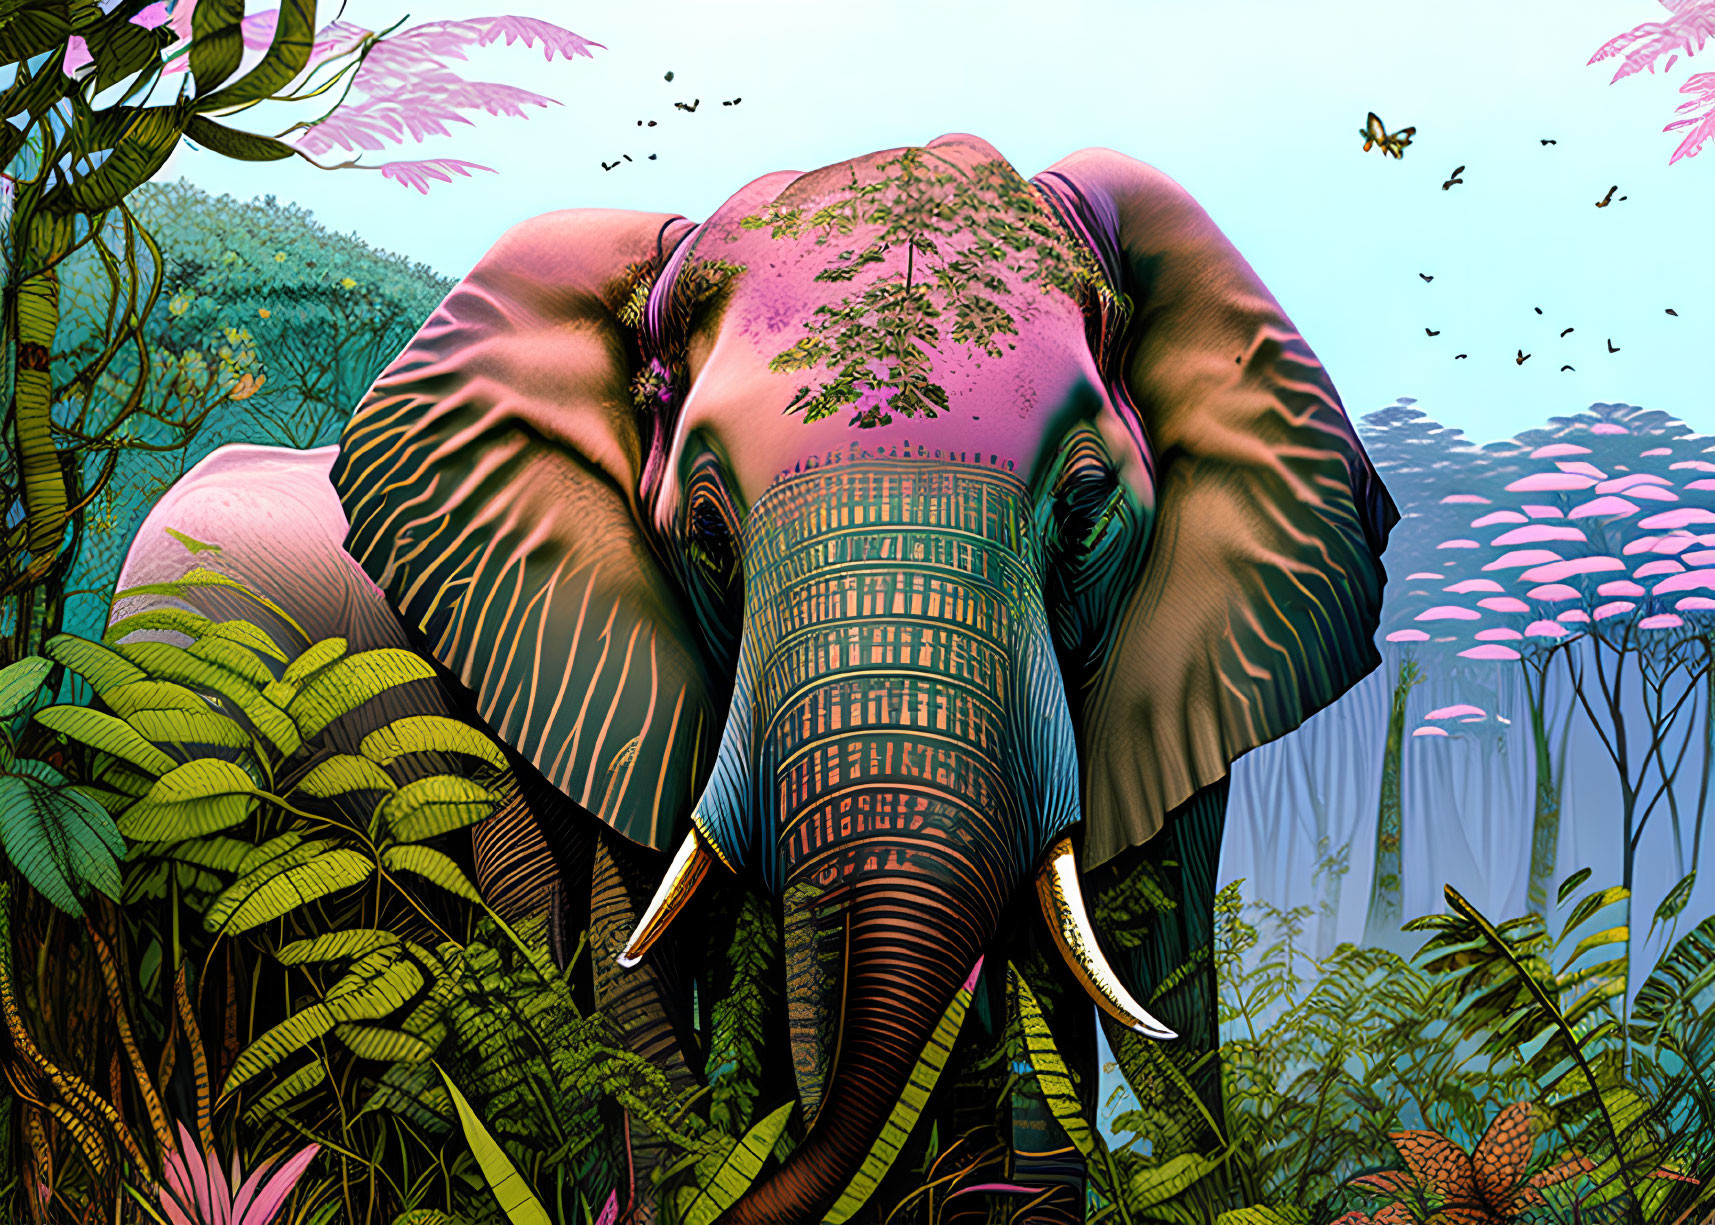 Colorful Elephant Artwork in Lush Jungle with Waterfalls